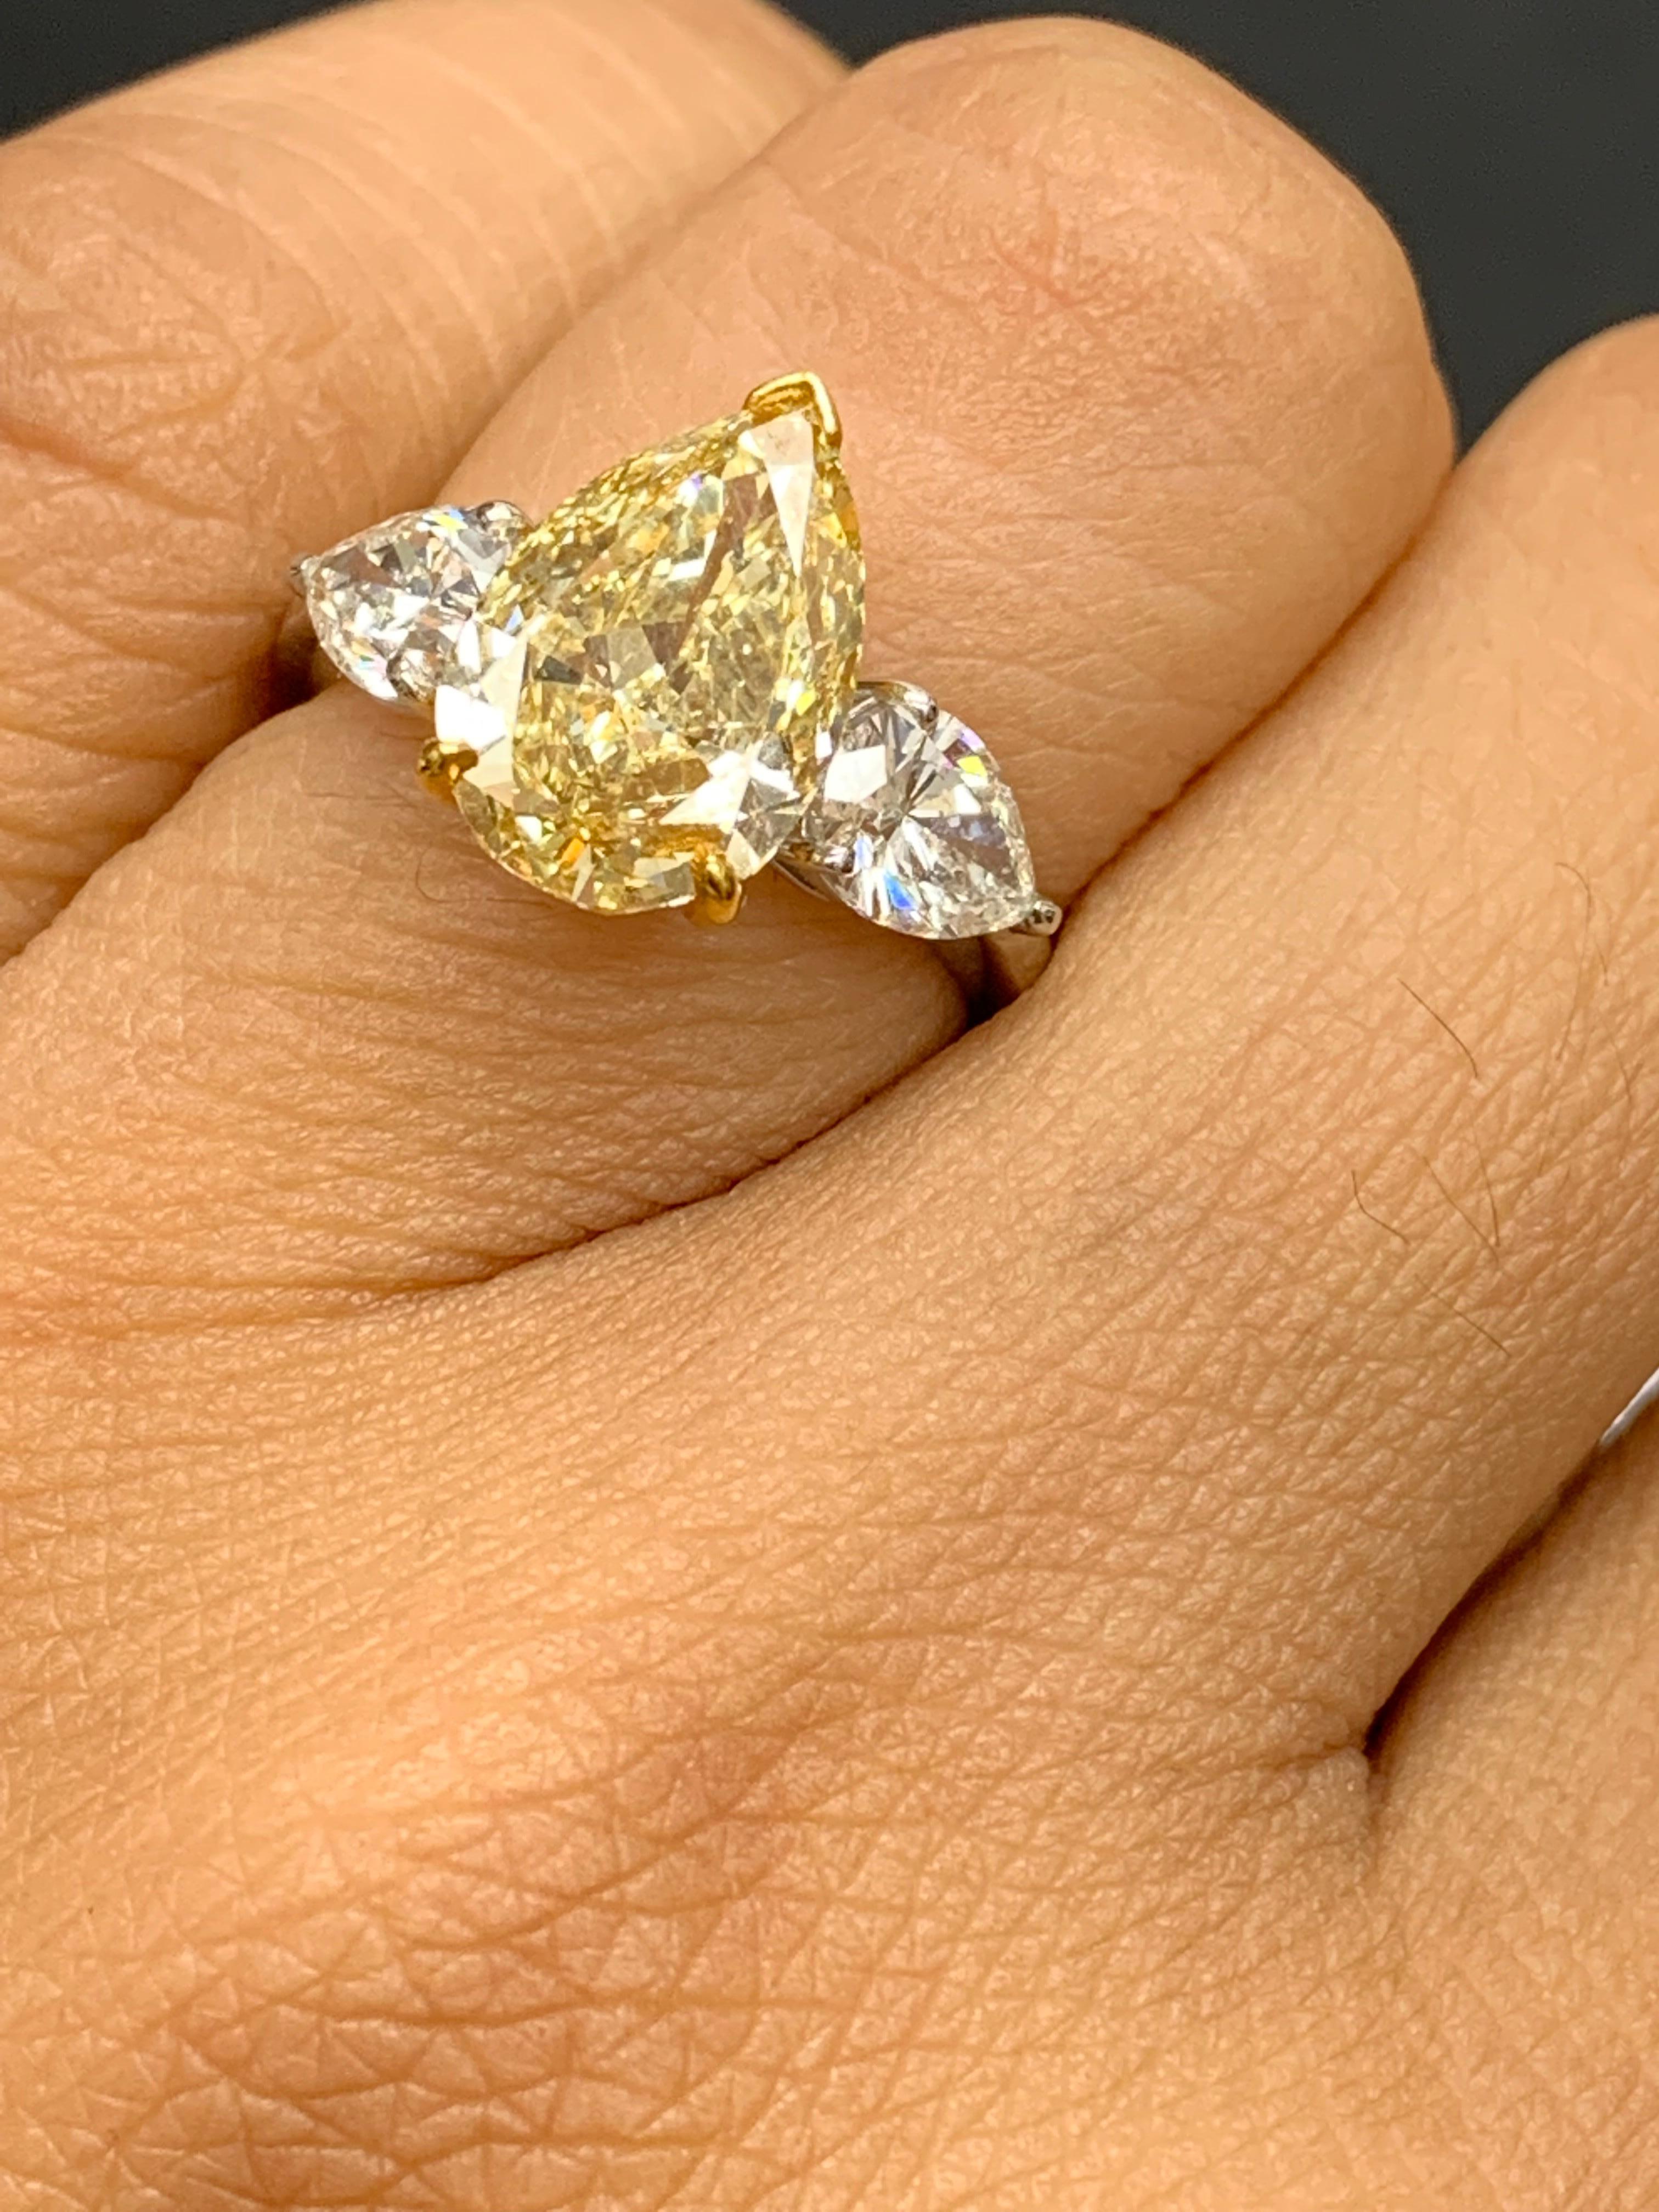 3.15 Carat Pear Shape Fancy Yellow Diamond 3 Stone Ring in Platinum For Sale 3